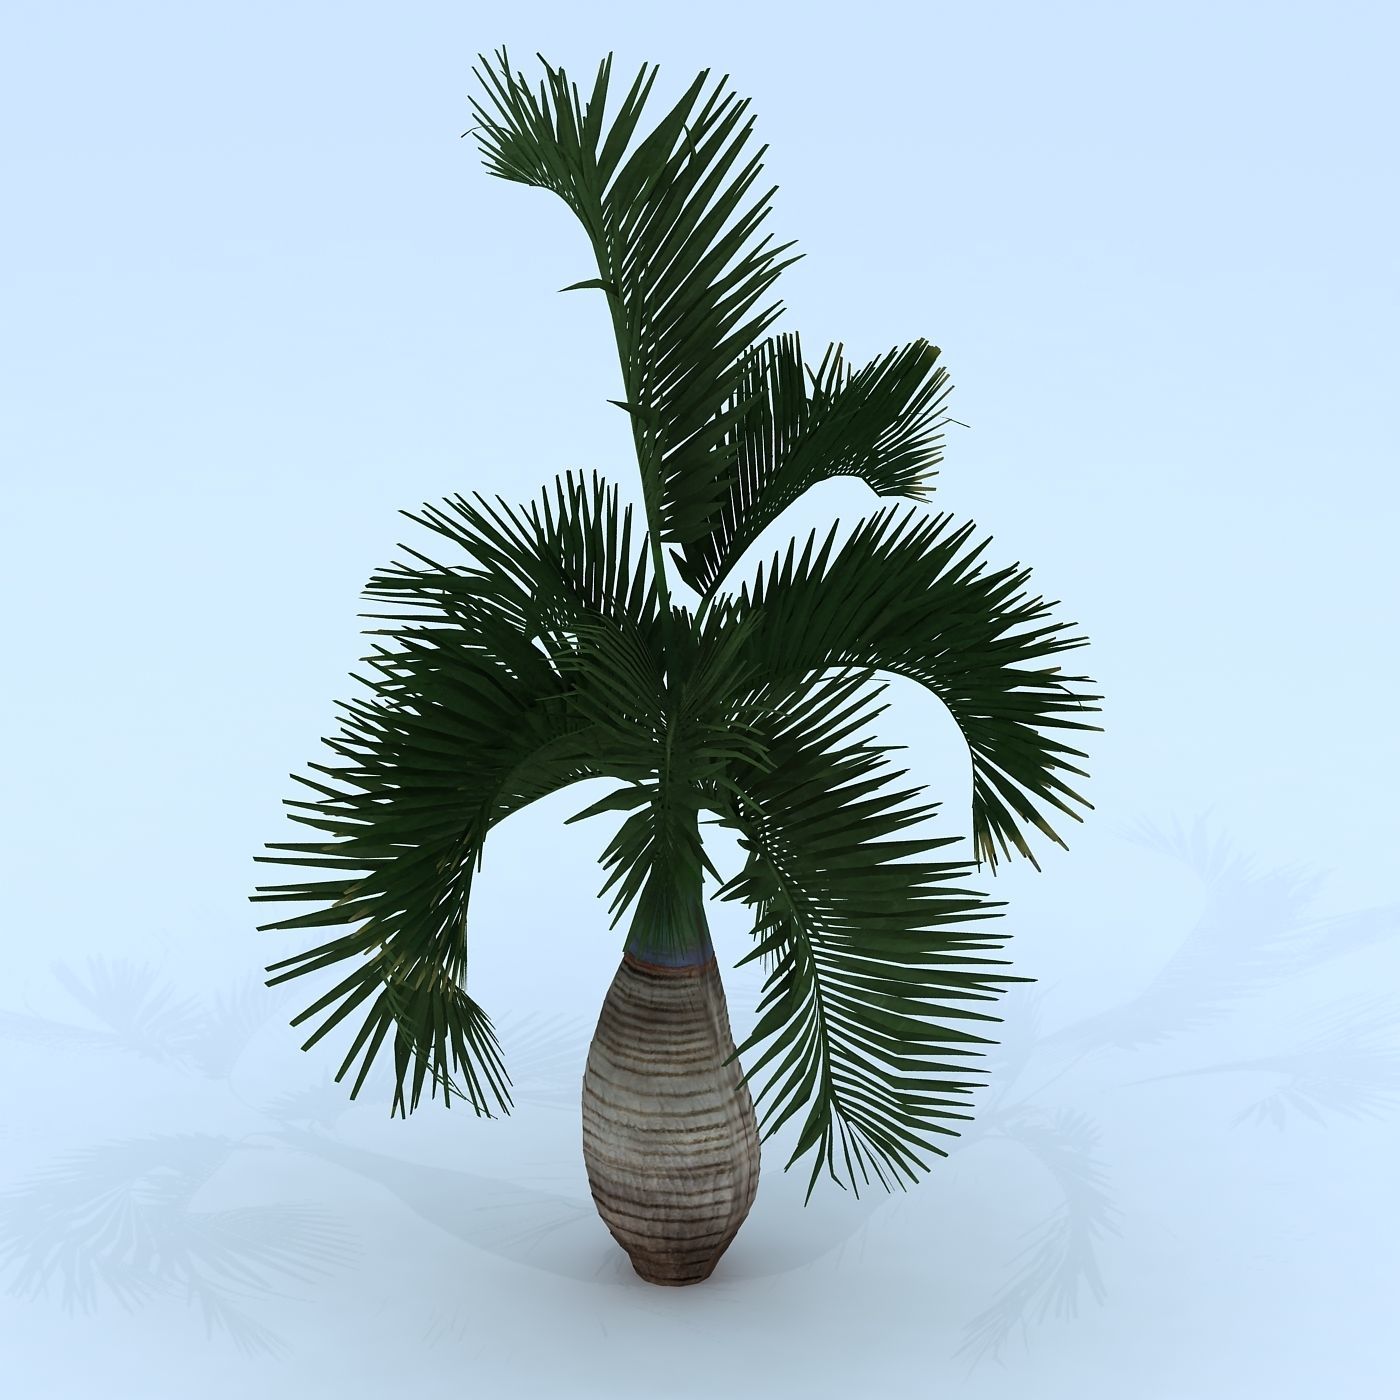 3D Forest flowers and plants - palm trees 03000 | CGTrader